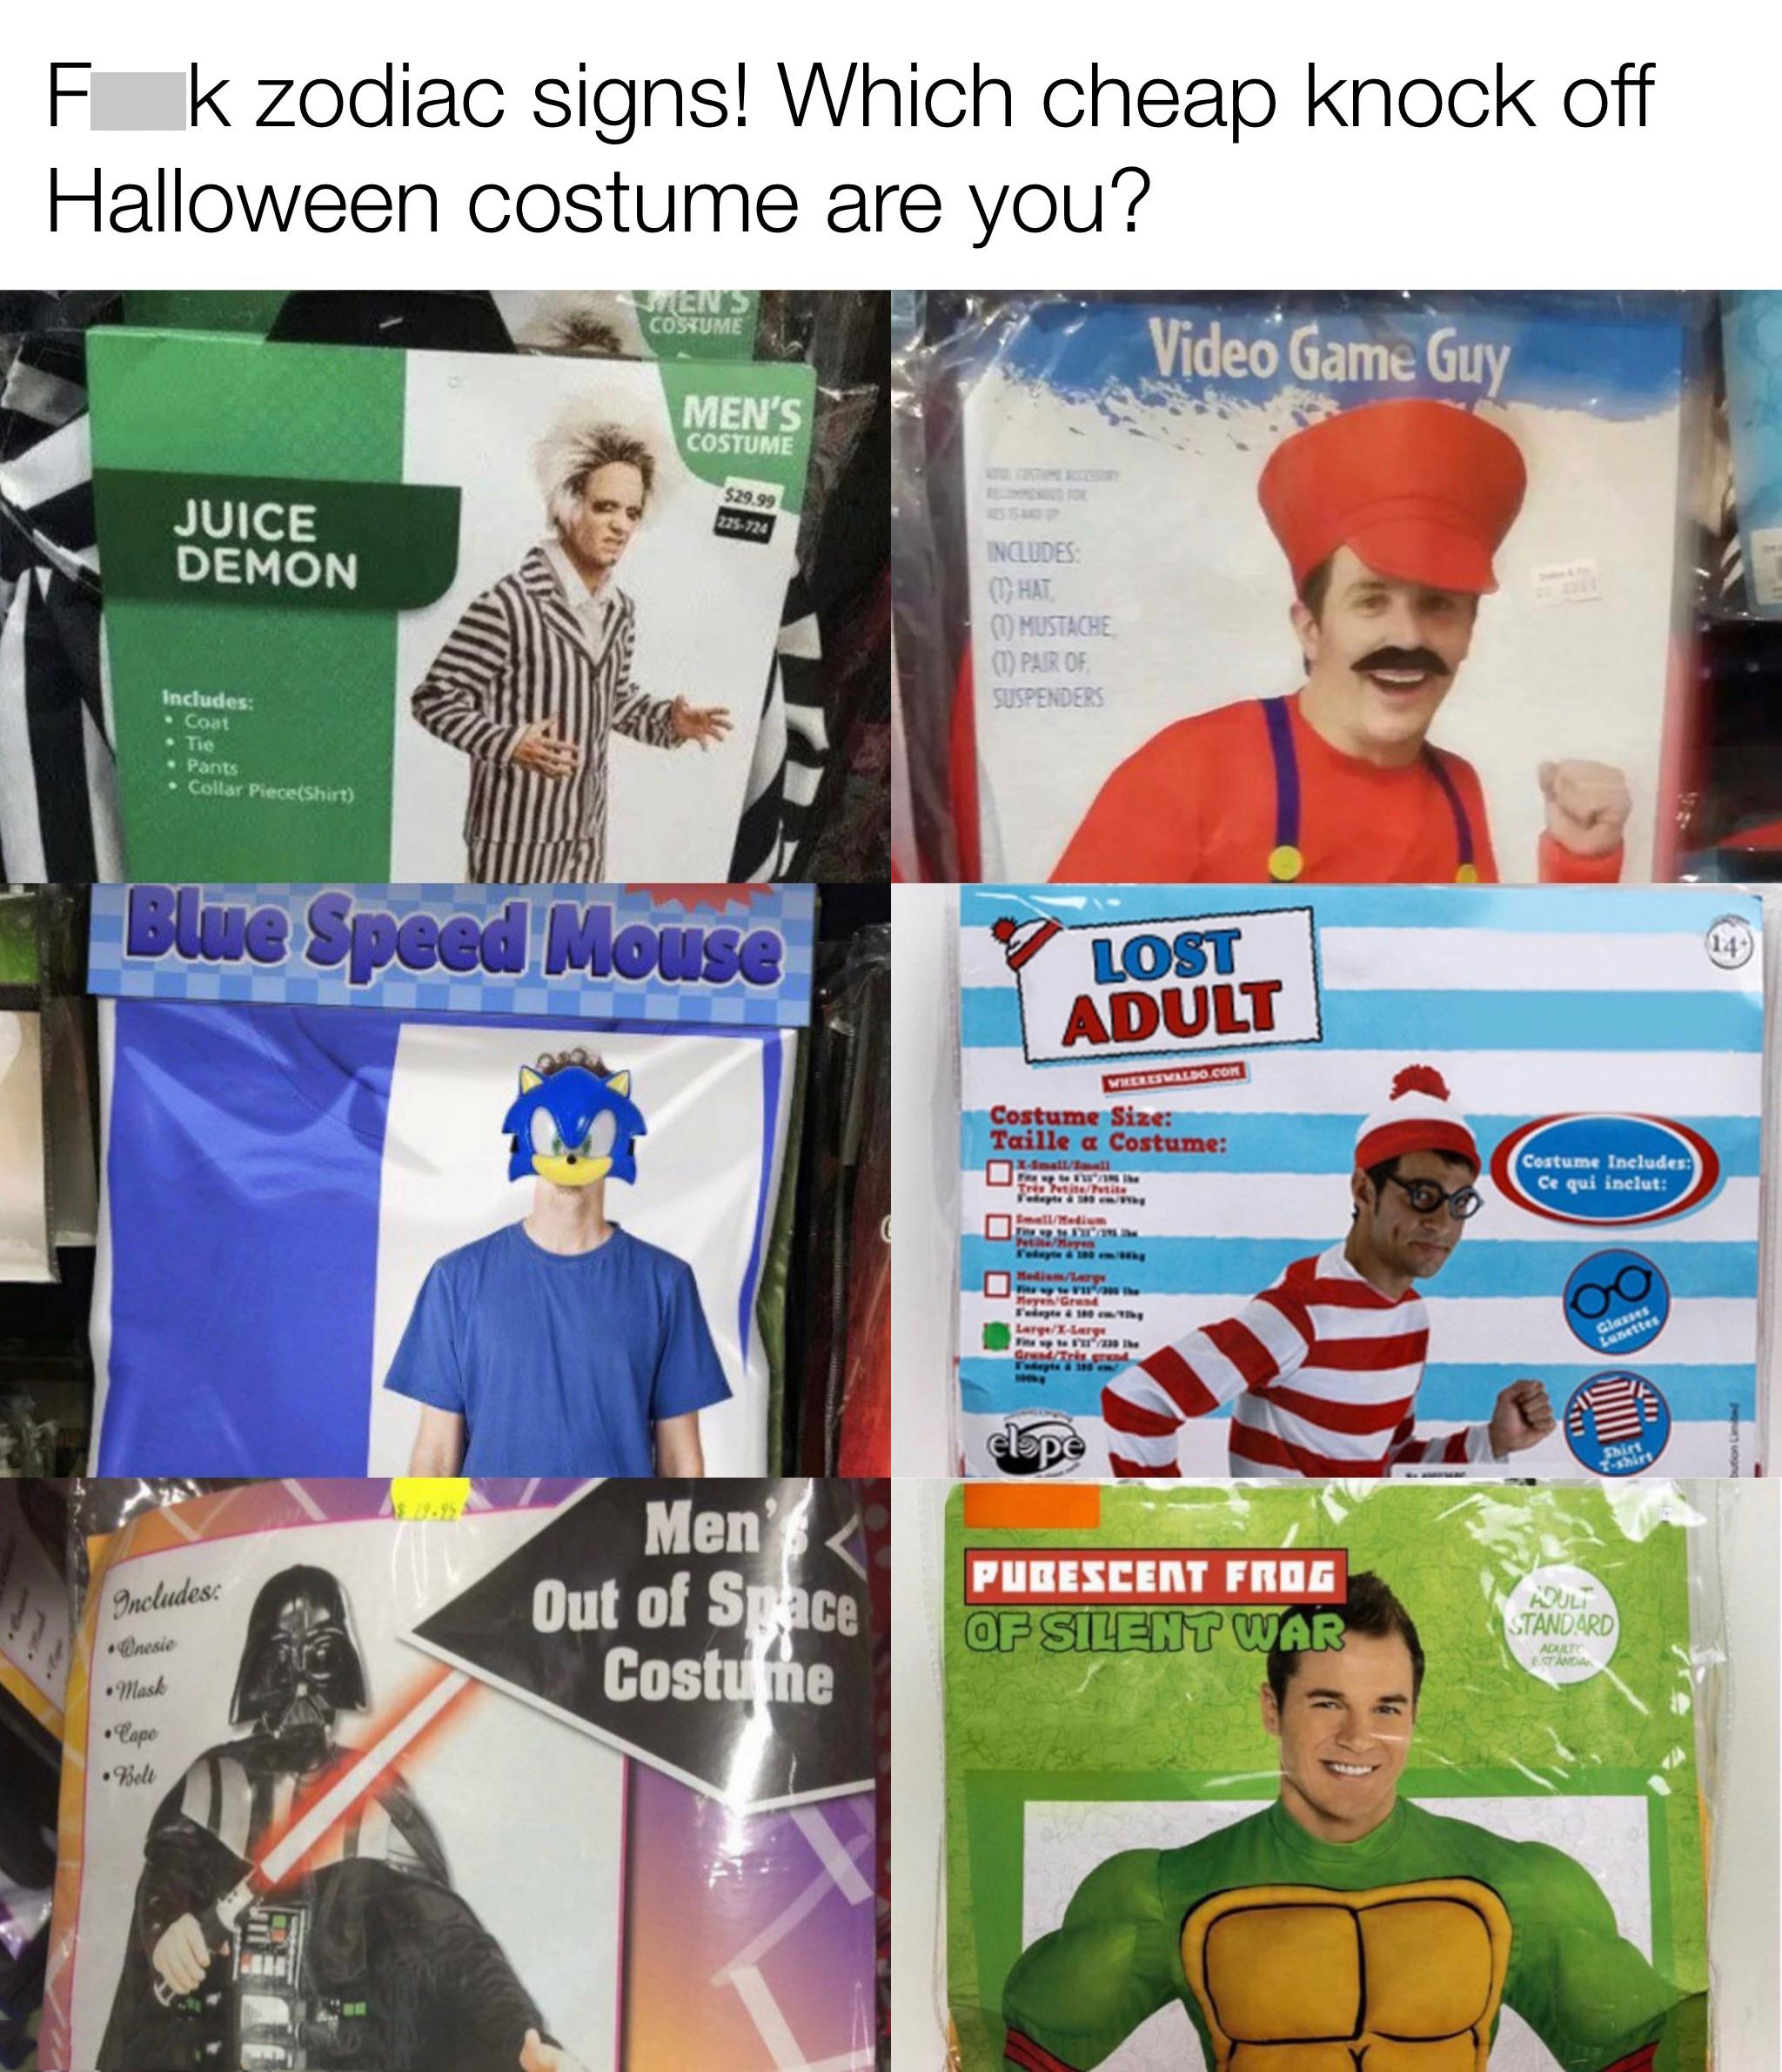 daily dose of pics and memes - banner - F k zodiac signs! Which cheap knock off Halloween costume are you? Juice Demon Blue Speed Mouse Pulades Bad p Men'S Men Out of Space Costume Pende Video Game Guy Lost Adult Contumelia Taille Costume Pubescent Frog O